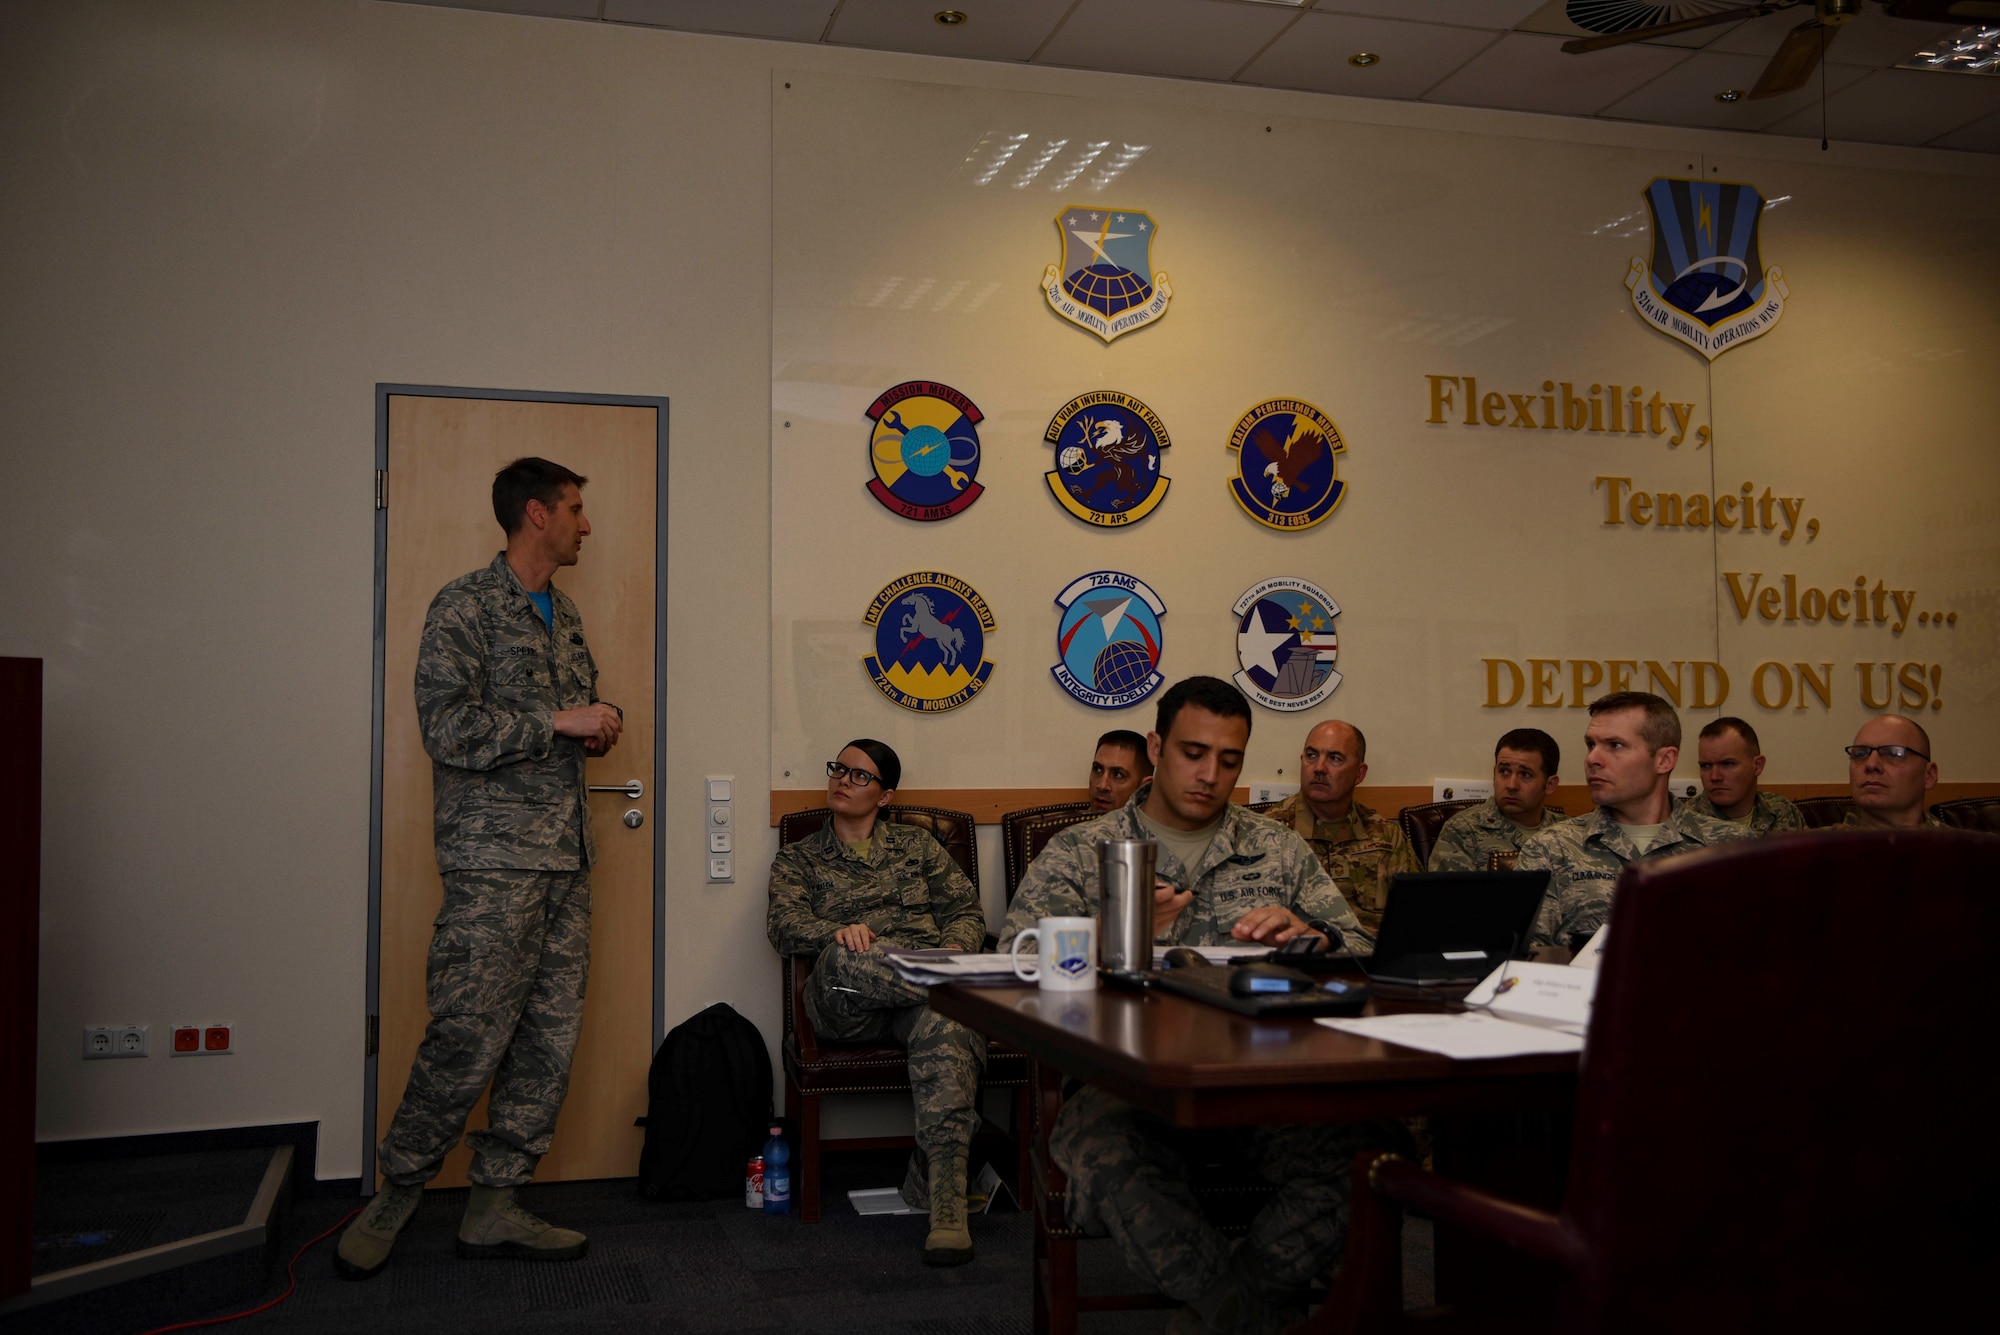 U.S. Air Force Col. Bradley Spears, 521st Air Mobility Operations Wing vice commander, spoke to current and upcoming leadership within the 521st AMOW during the Squadron Leadership Orientation Course on Ramstein Air Base, Germany, April 20, 2018. The course focused on 521st AMOW’s strategic priorities of developing Airmen and enhancing partnerships.